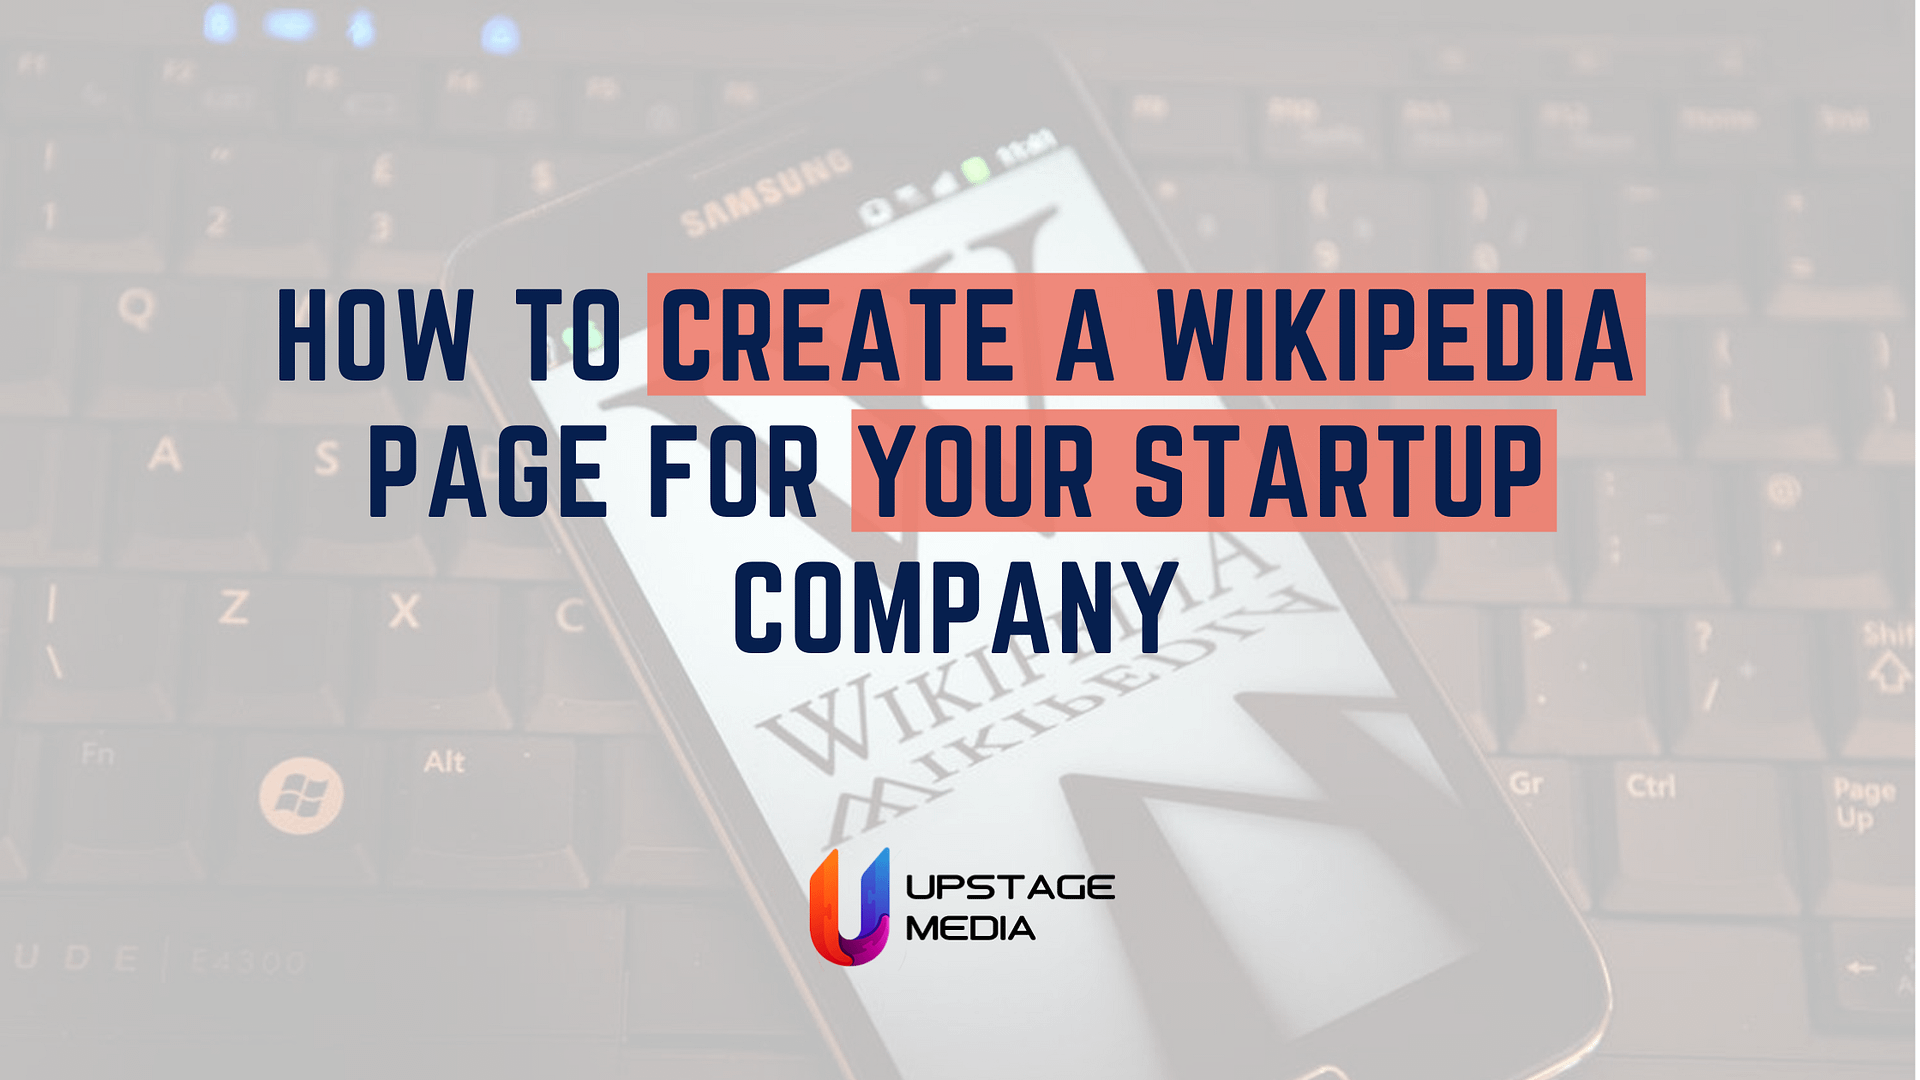 How to Create a Wikipedia Page for Your Startup Company